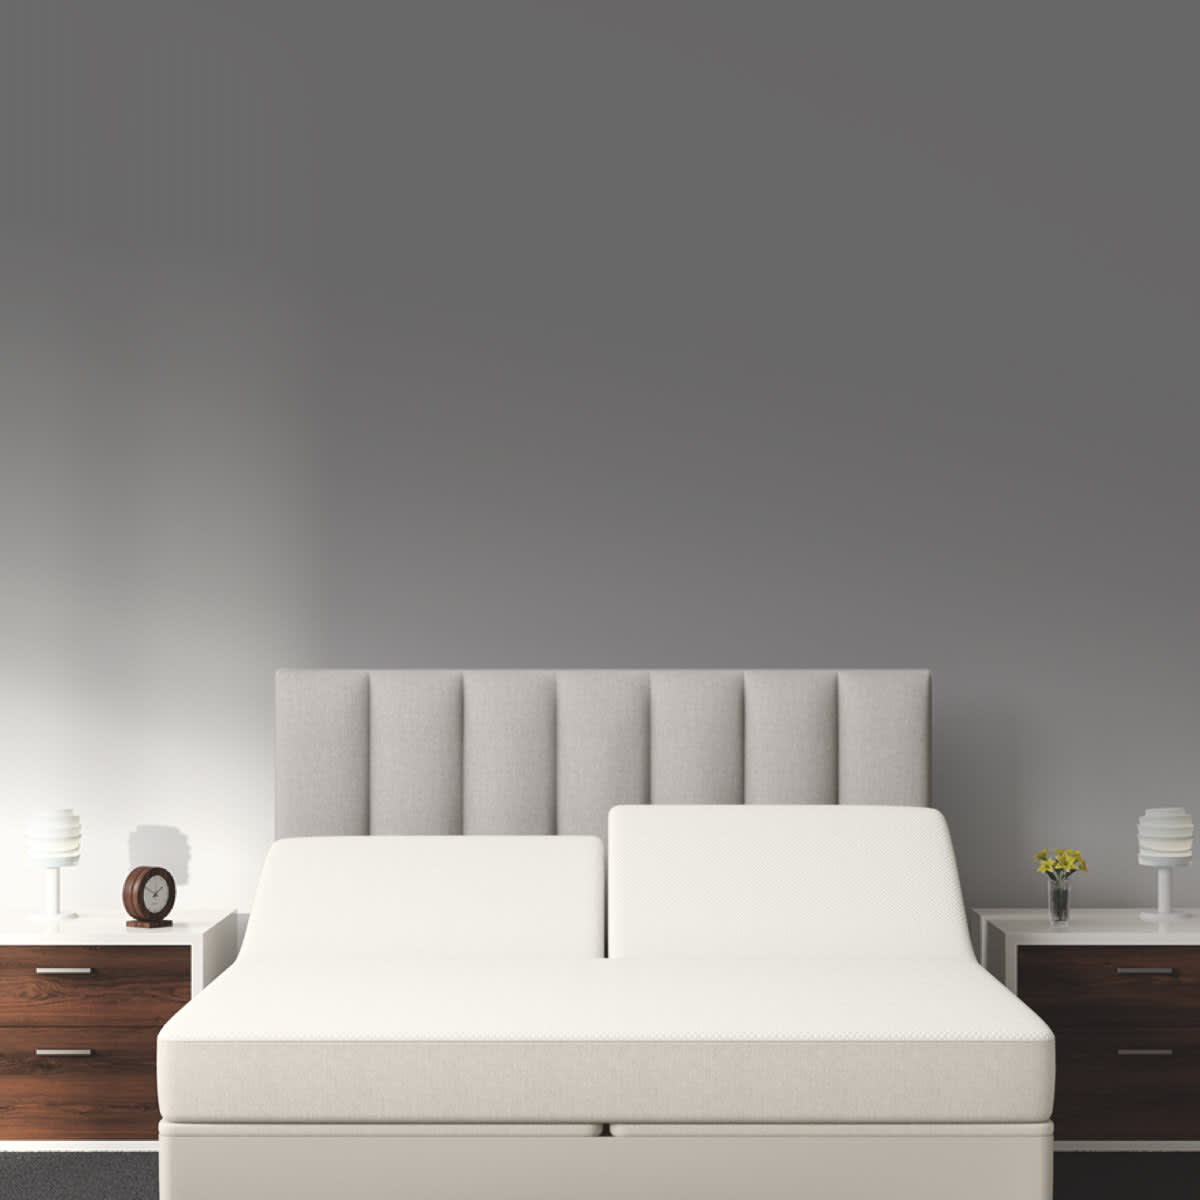 Adjustable and Smart Beds, Bedding and Pillows - Sleep Number